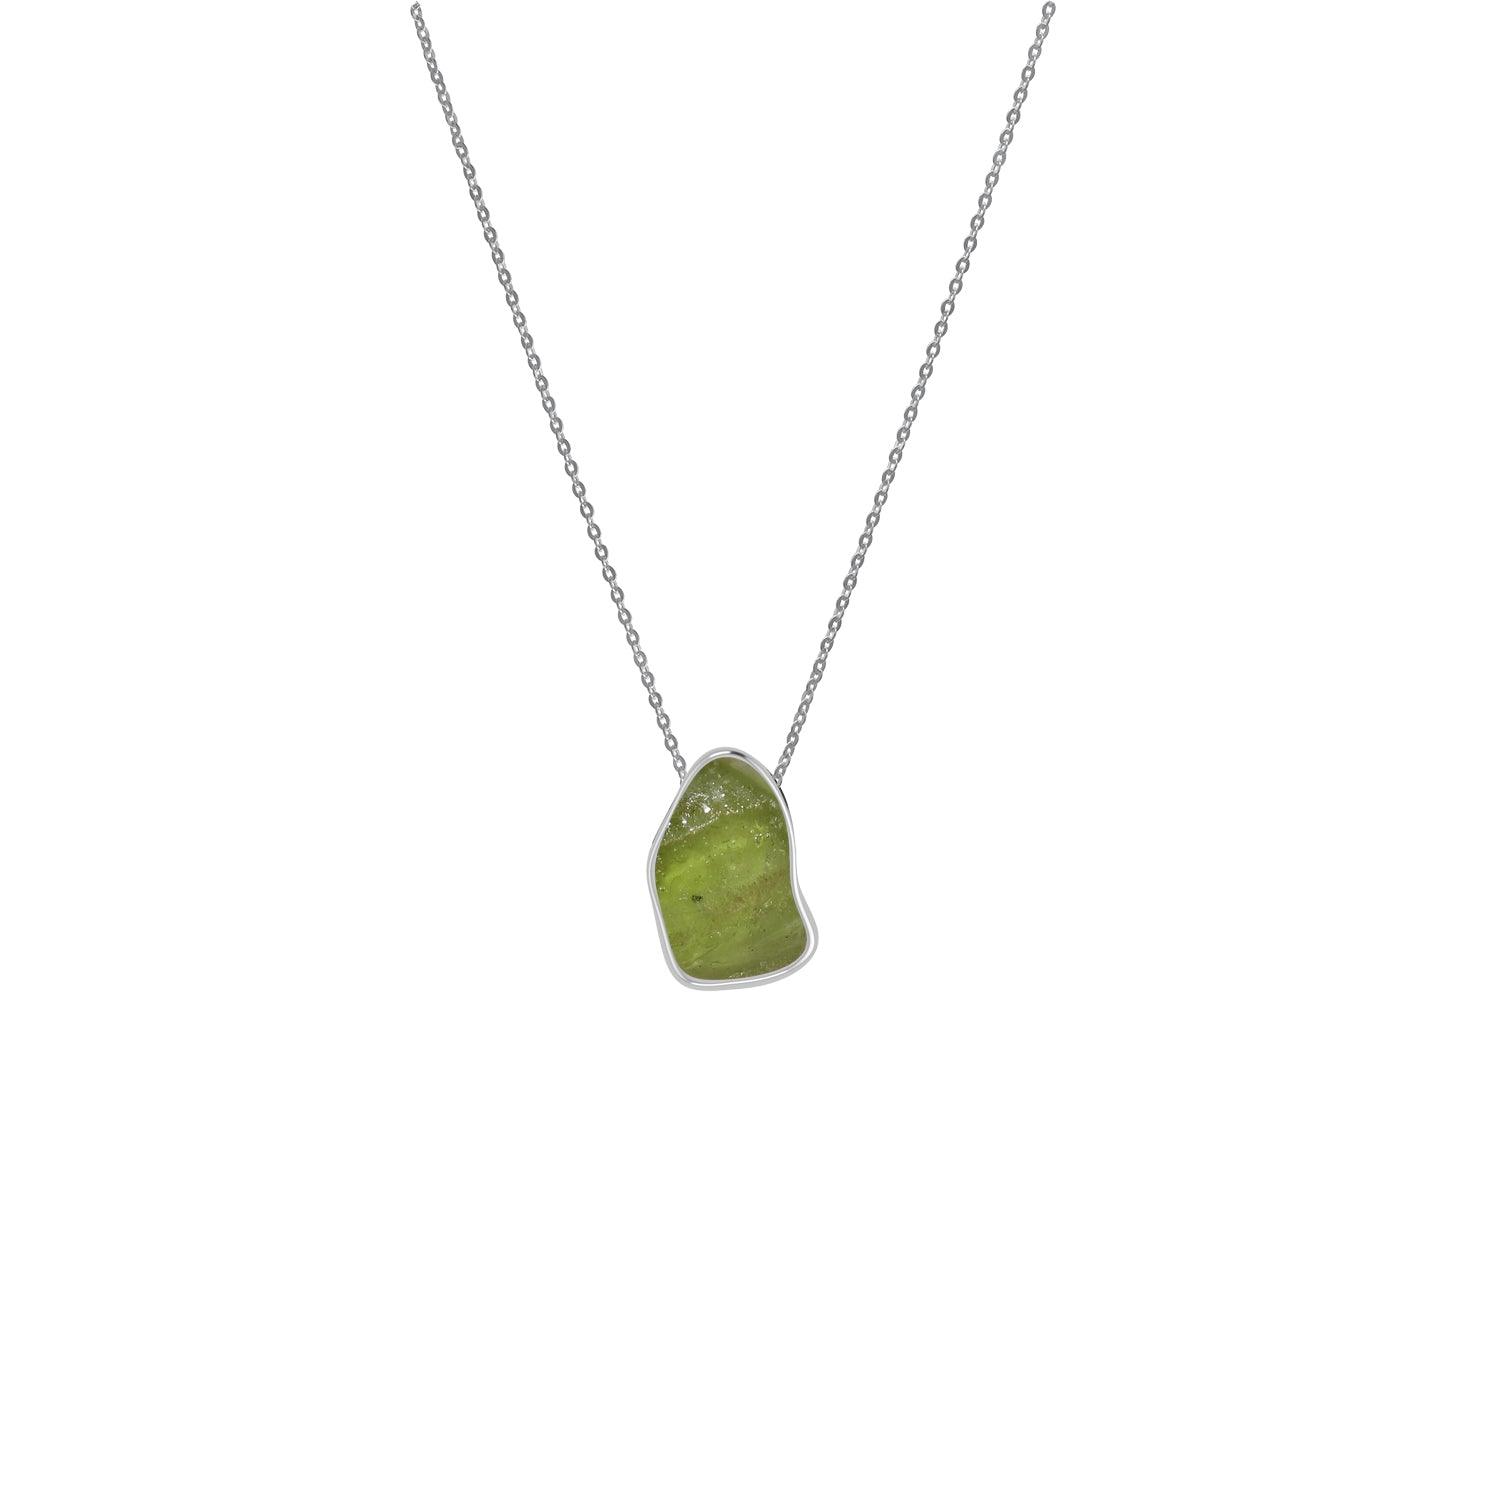 925 Sterling Silver Rough Peridot Slider Necklace With Chain 18" Bezel Set Jewelry Pack of 6